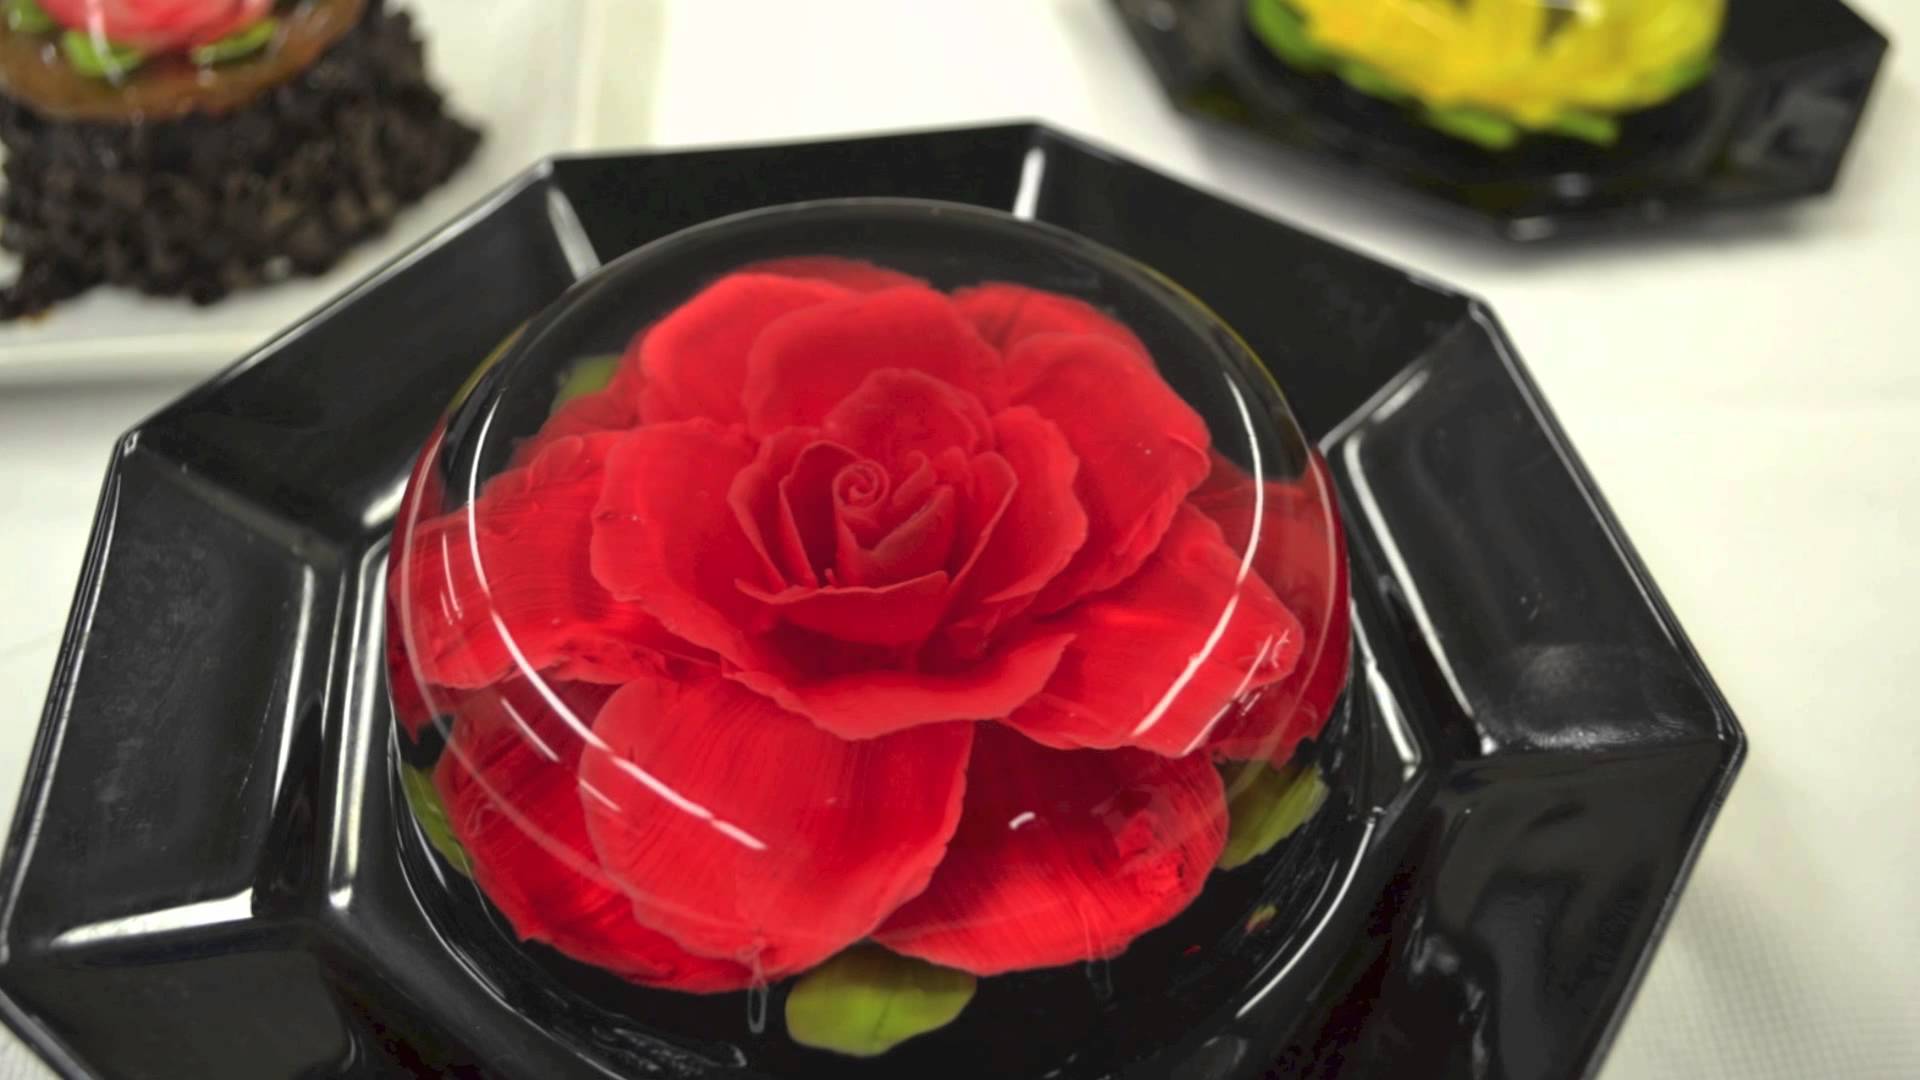 Jello Flower Introduction - Jello With Flowers Inside - HD Wallpaper 